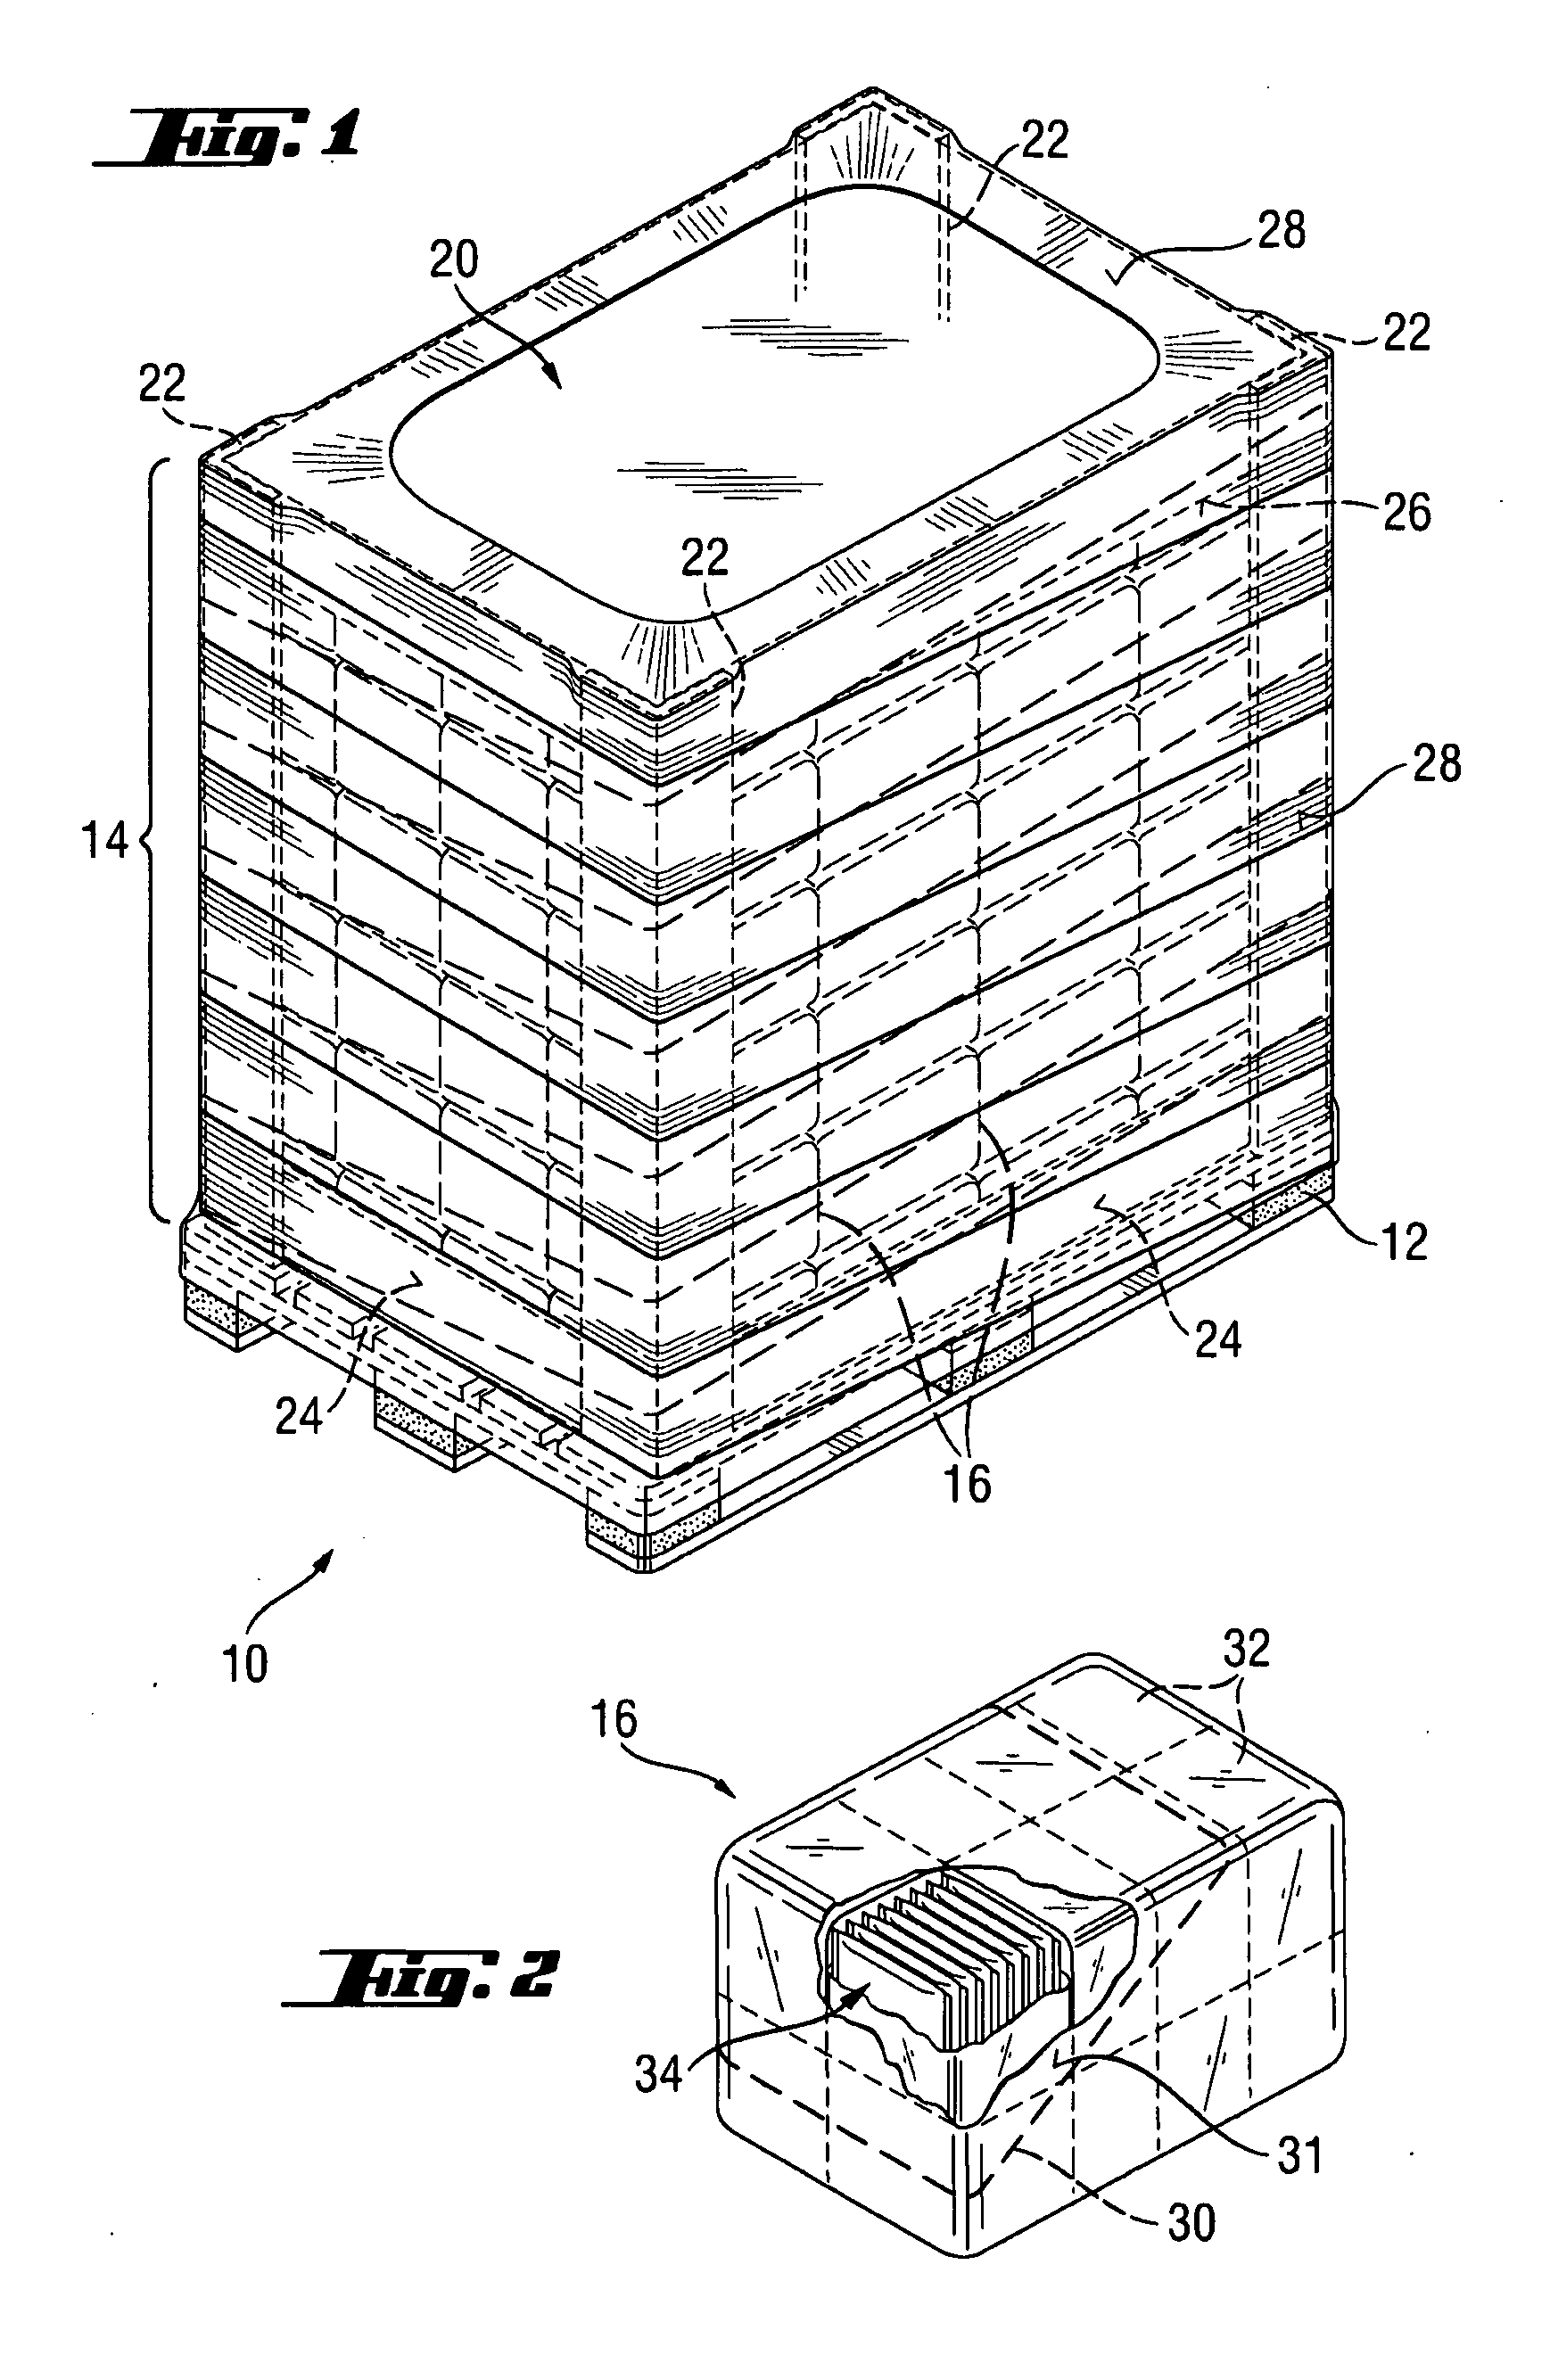 Unit load for the transport of absorbent hygiene articles